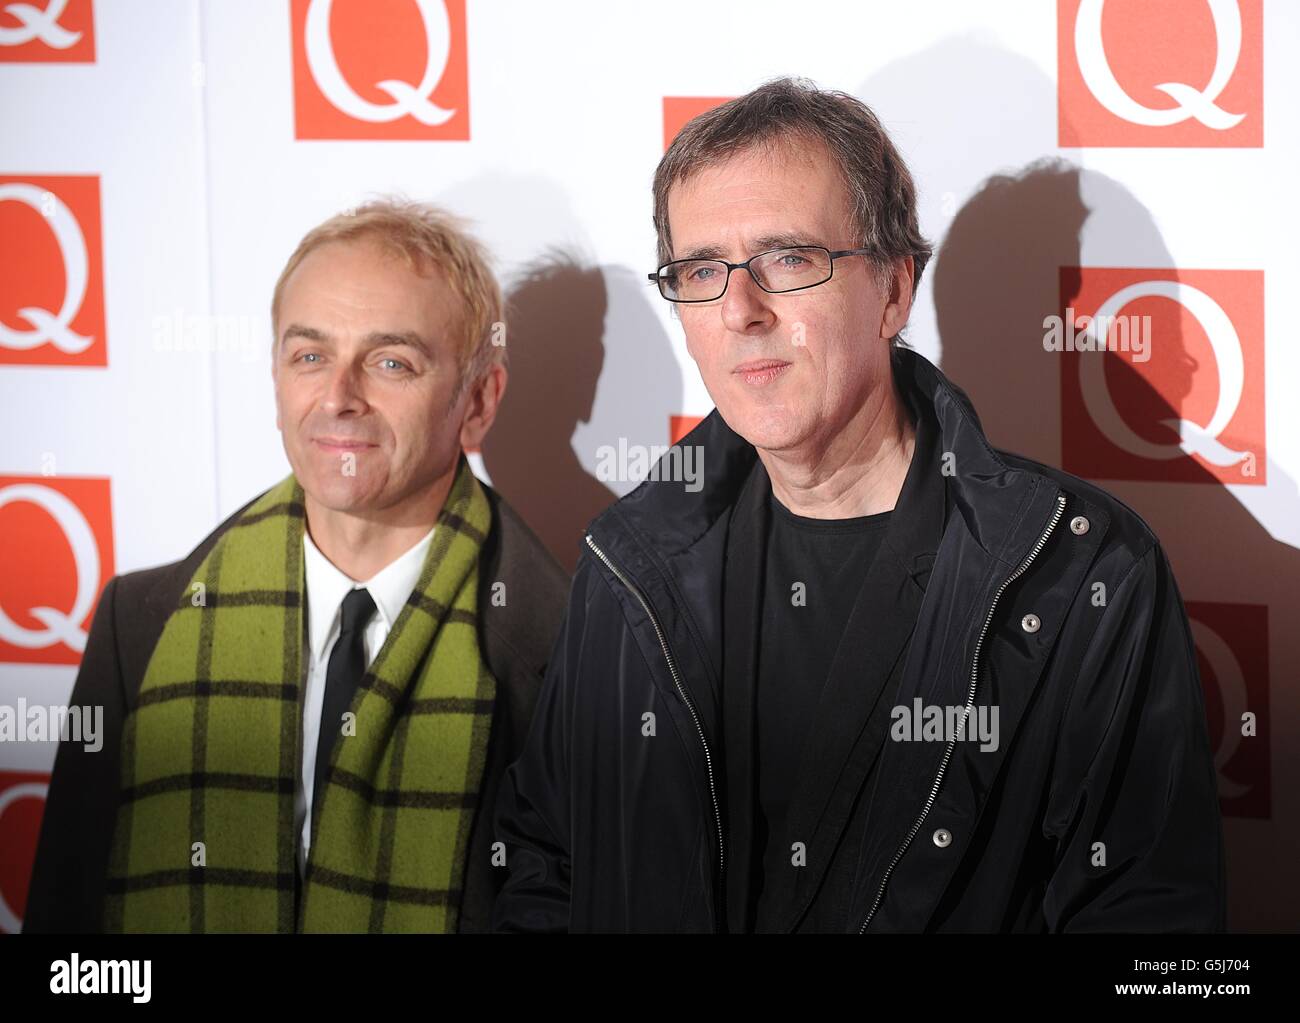 The Q Awards - London. Karl Hyde and Rick Smith from Underworld at the 2012 Q Awards at the Grosvenor House Hotel, Park Lane, London Stock Photo